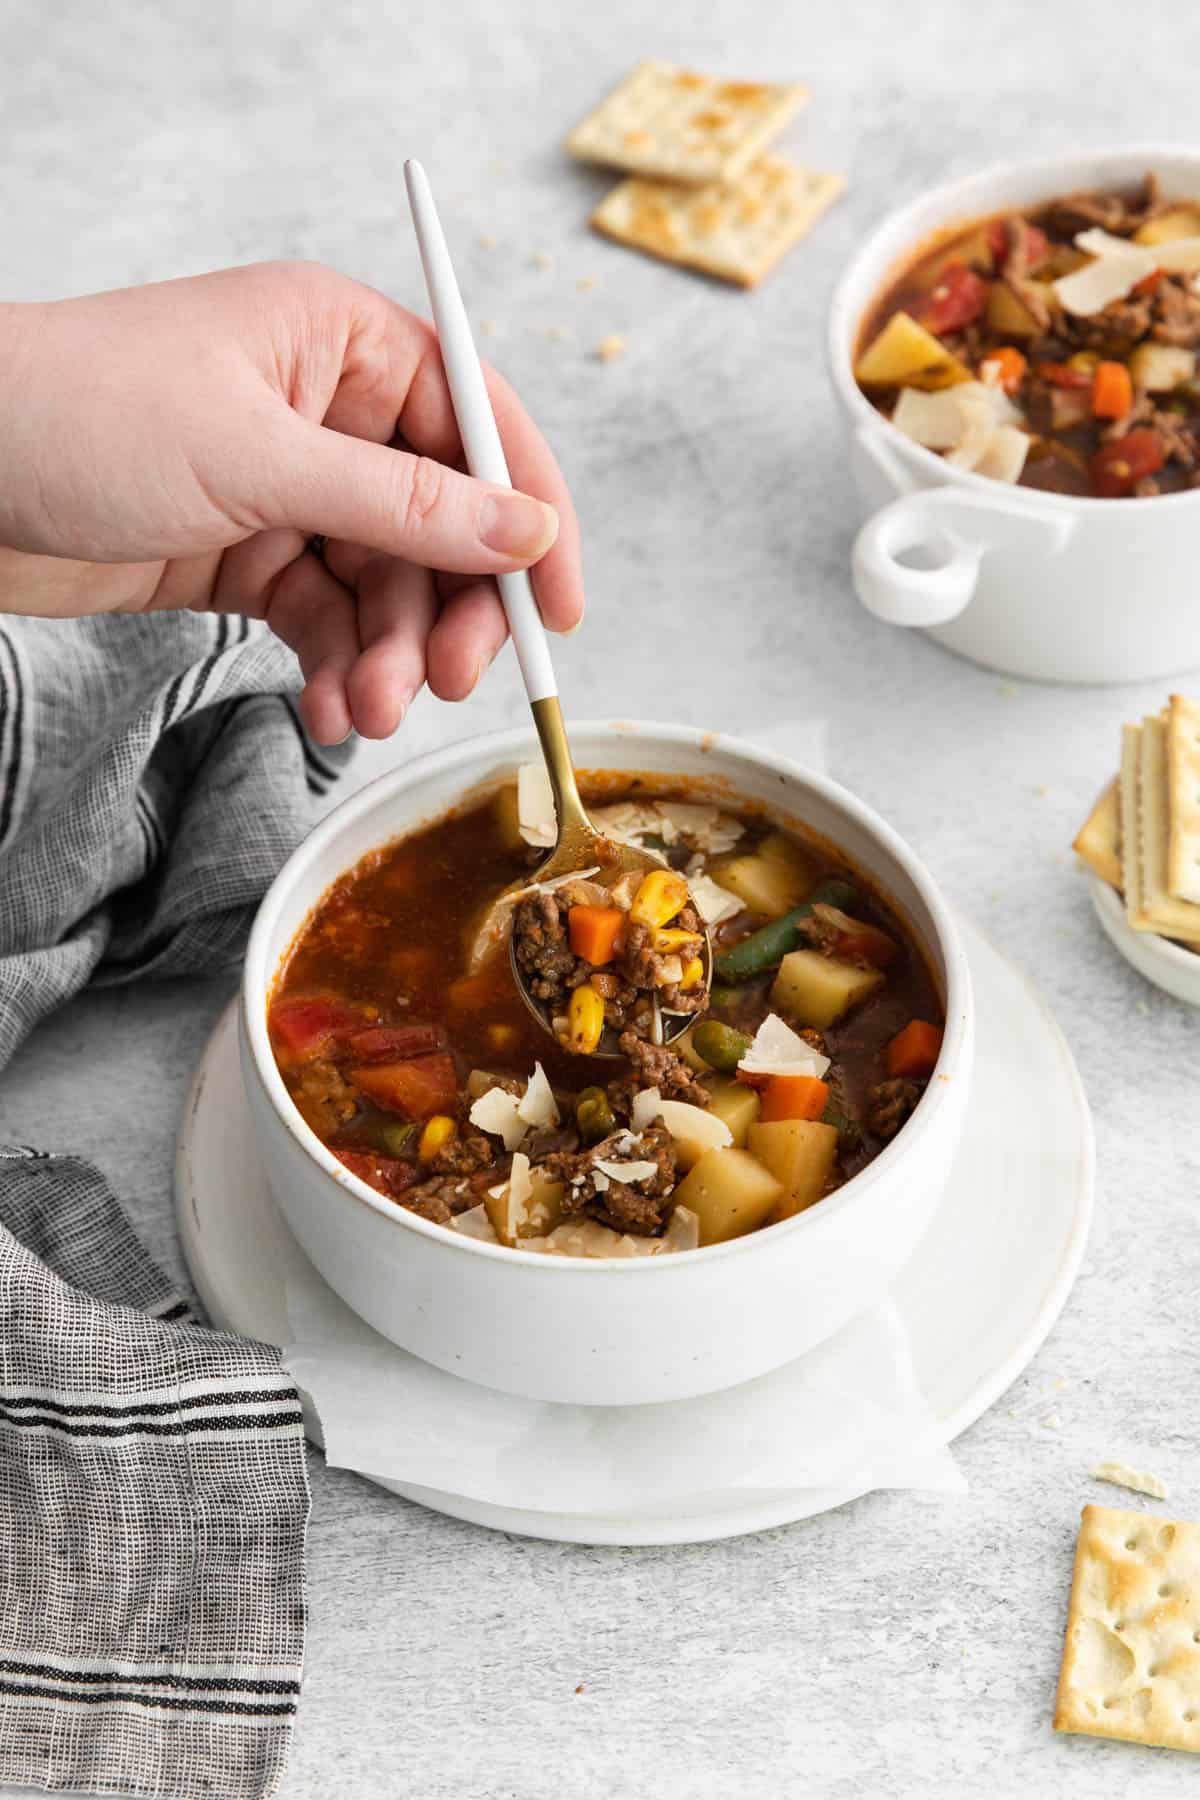 A hand holding a spoon scooping up some vegetable beef soup.